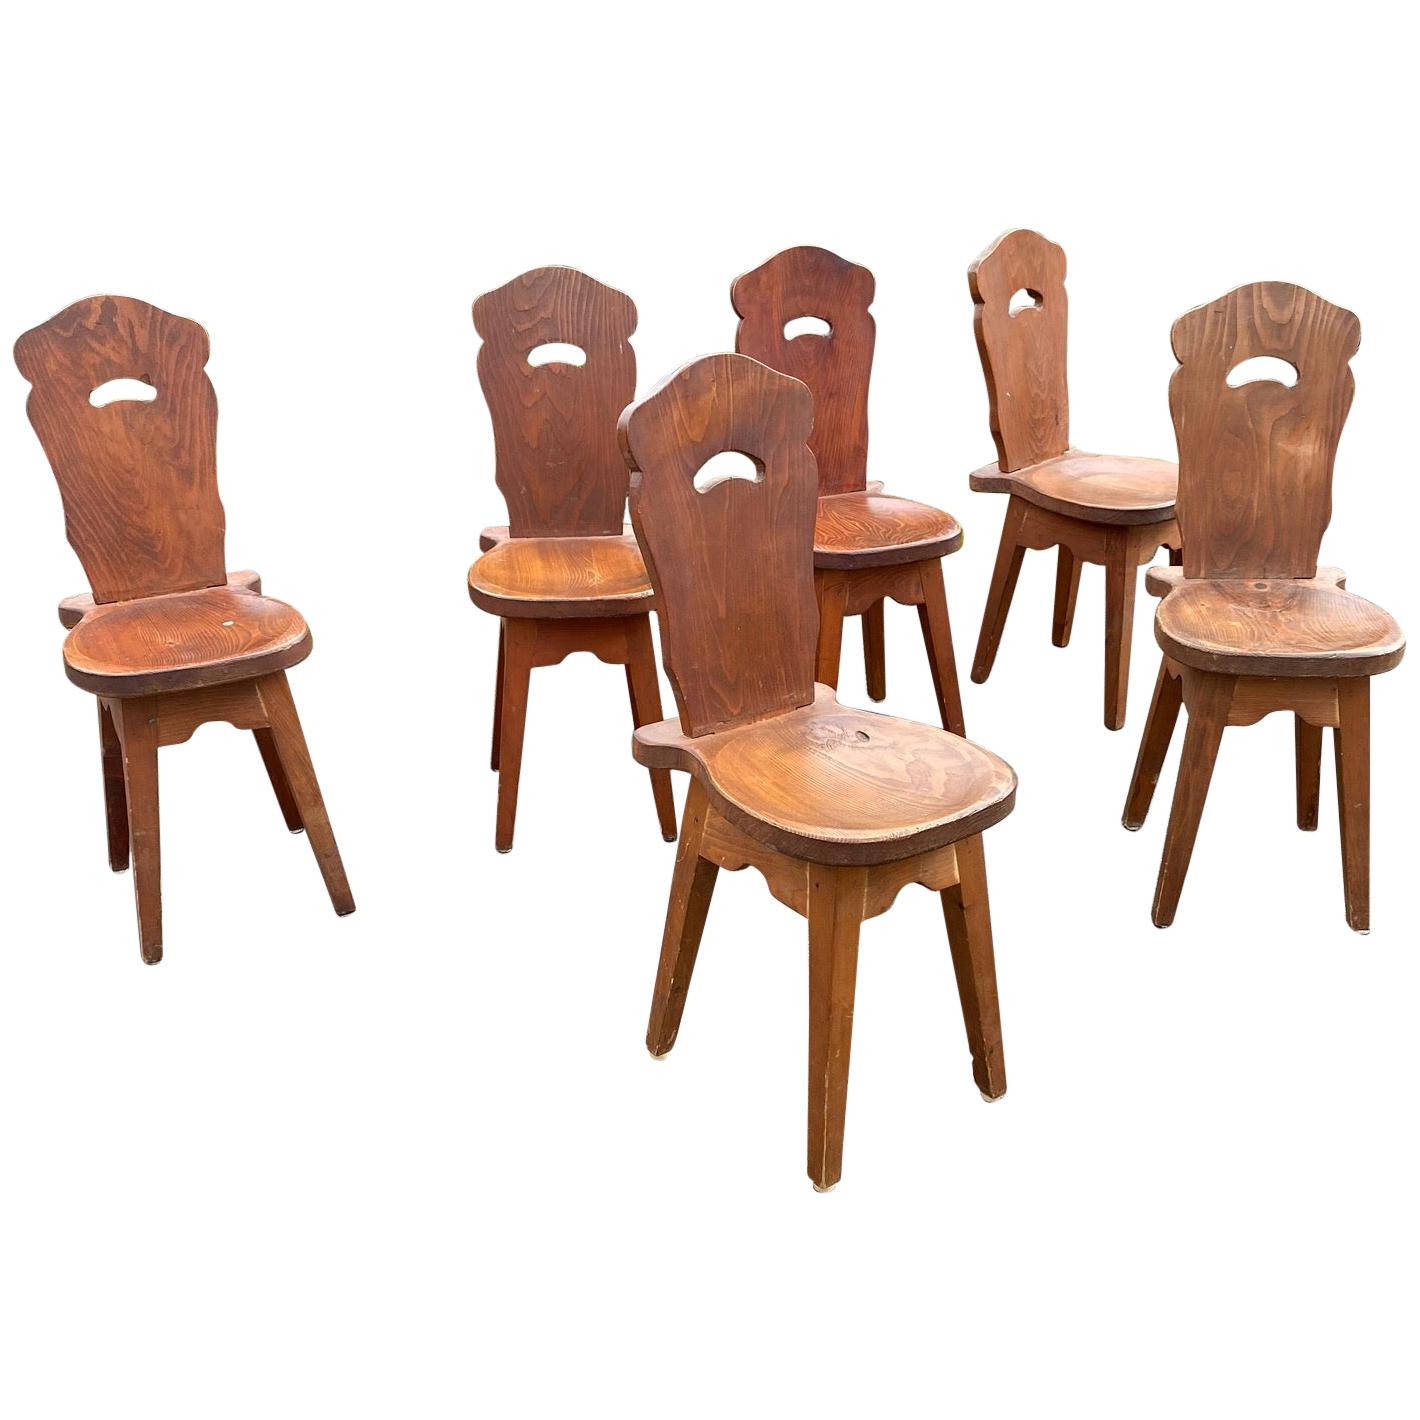 6 Brutalist Mountain Chairs, in Pine circa 1950